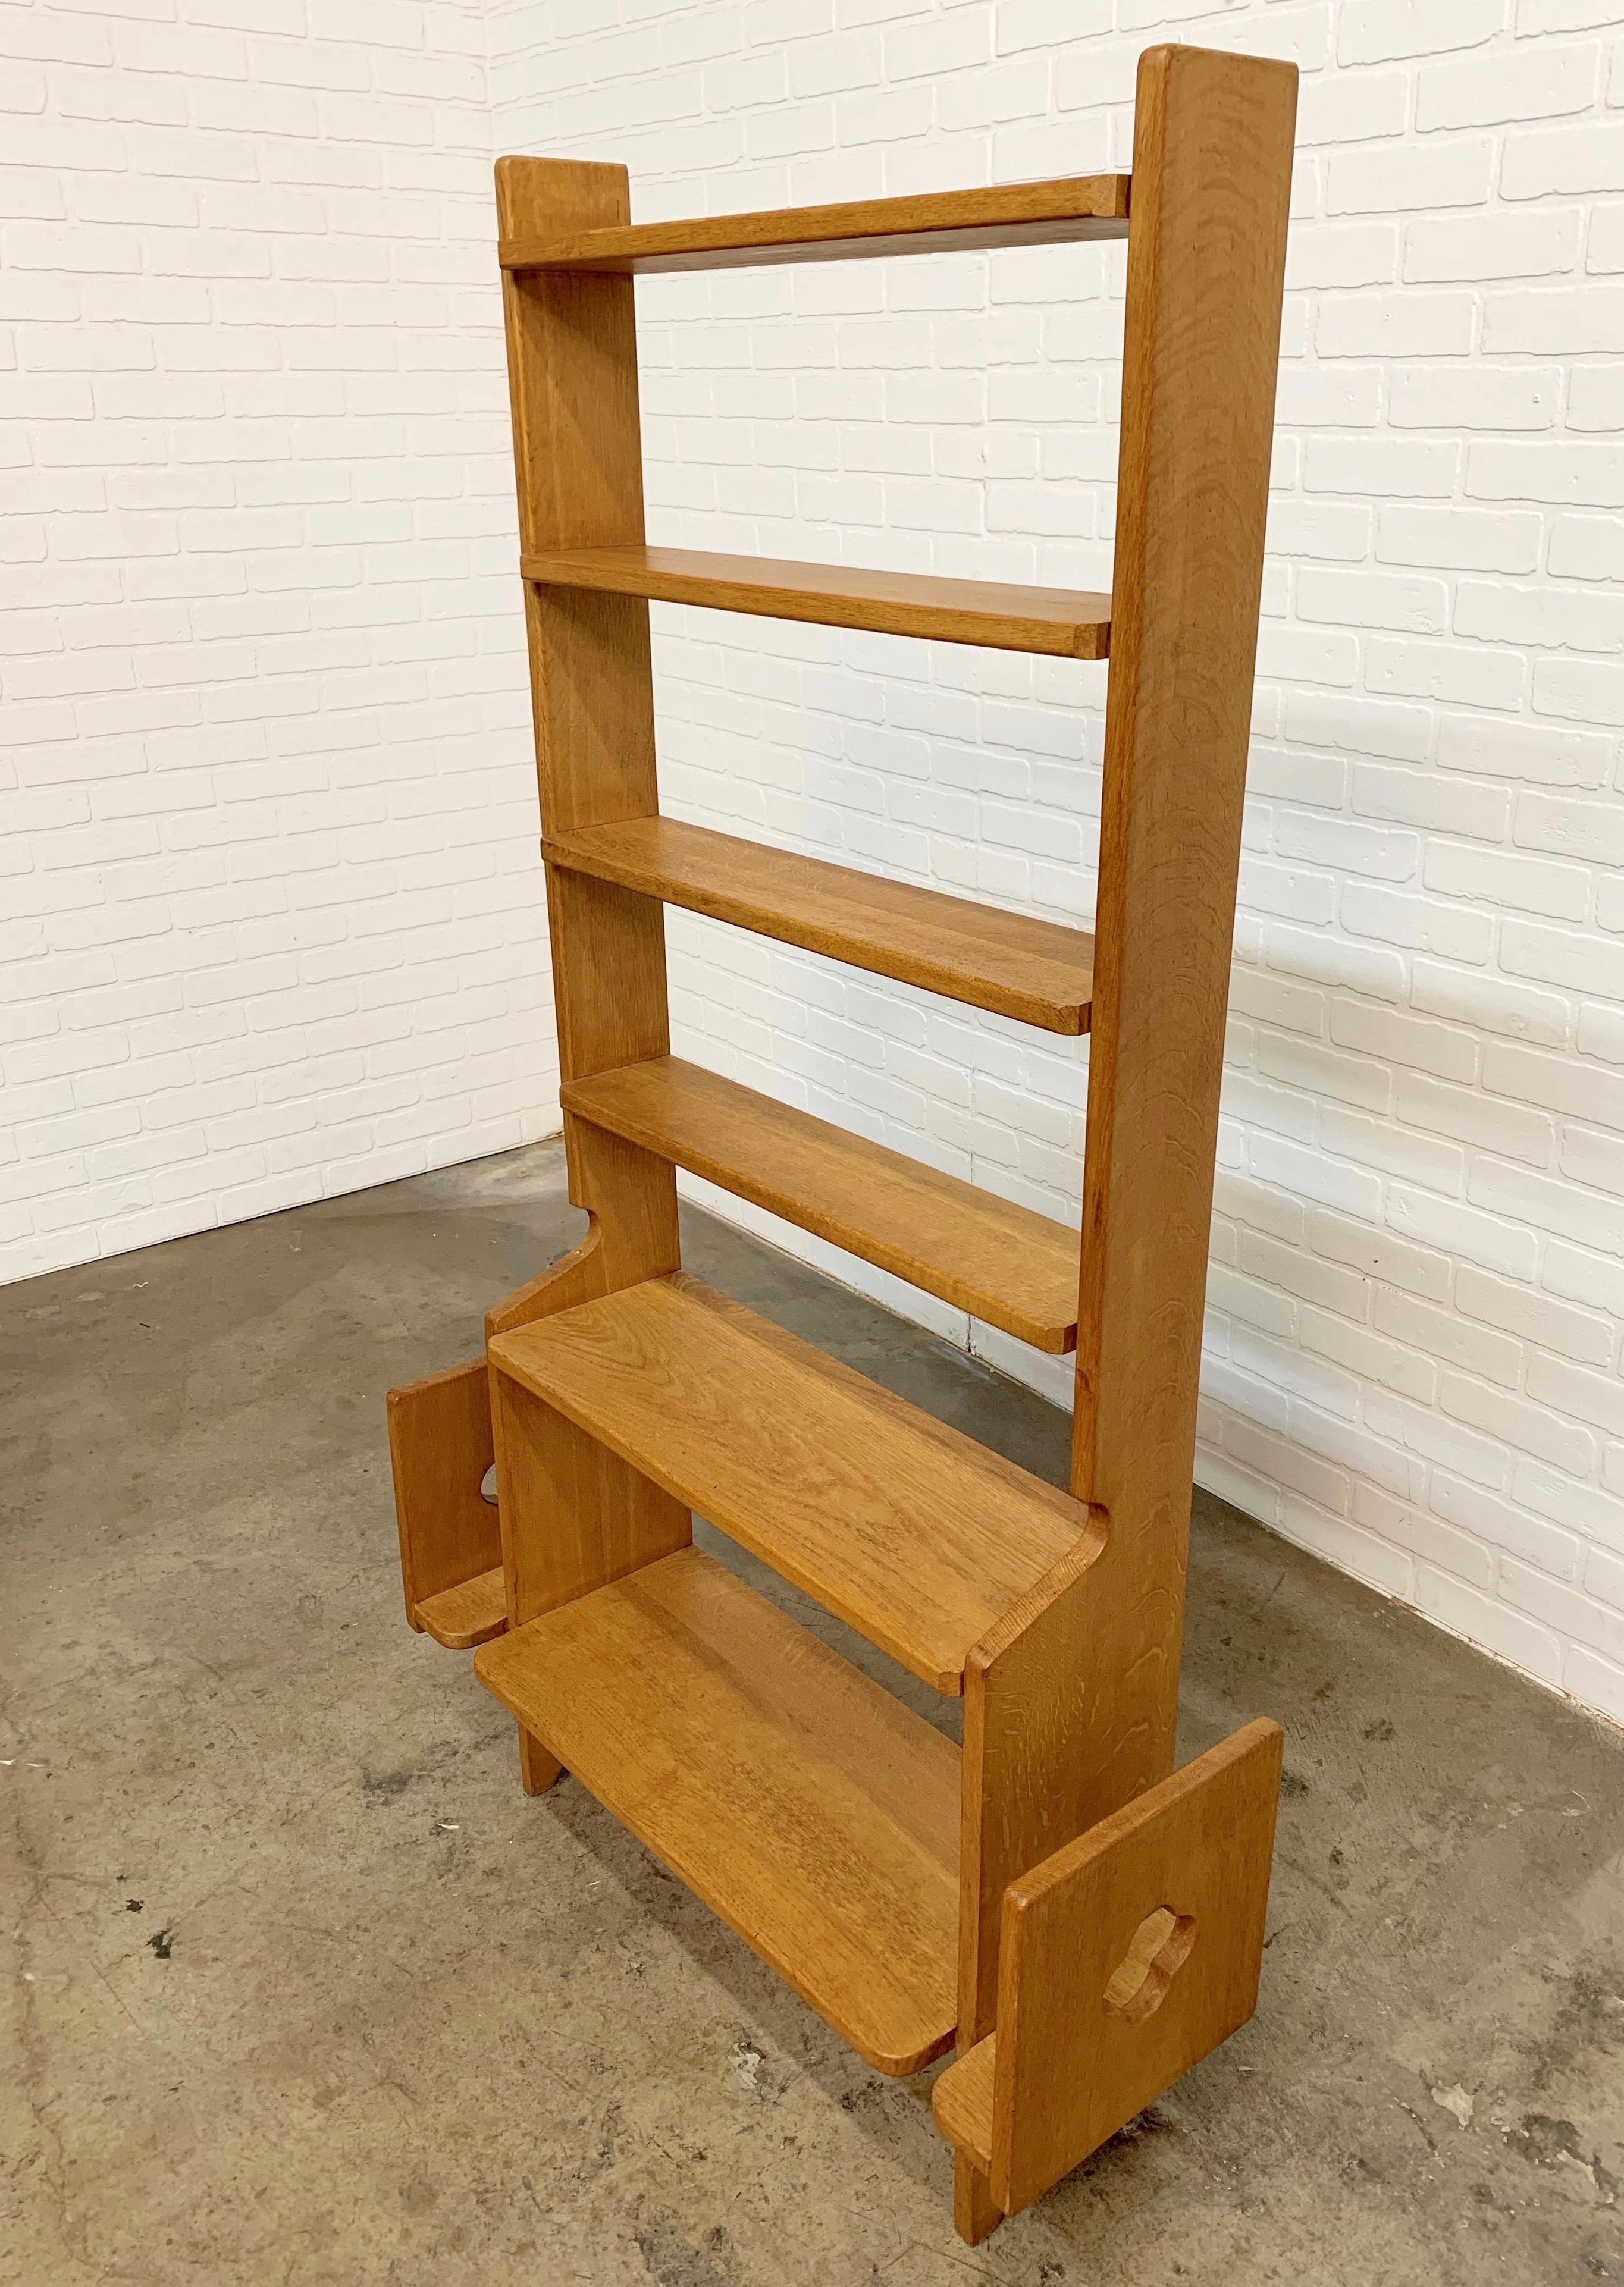 This bookshelf was designed by the French duo Guillerme and Chambron for Votre Maison in the 1960s. Perfect for books or pottery.